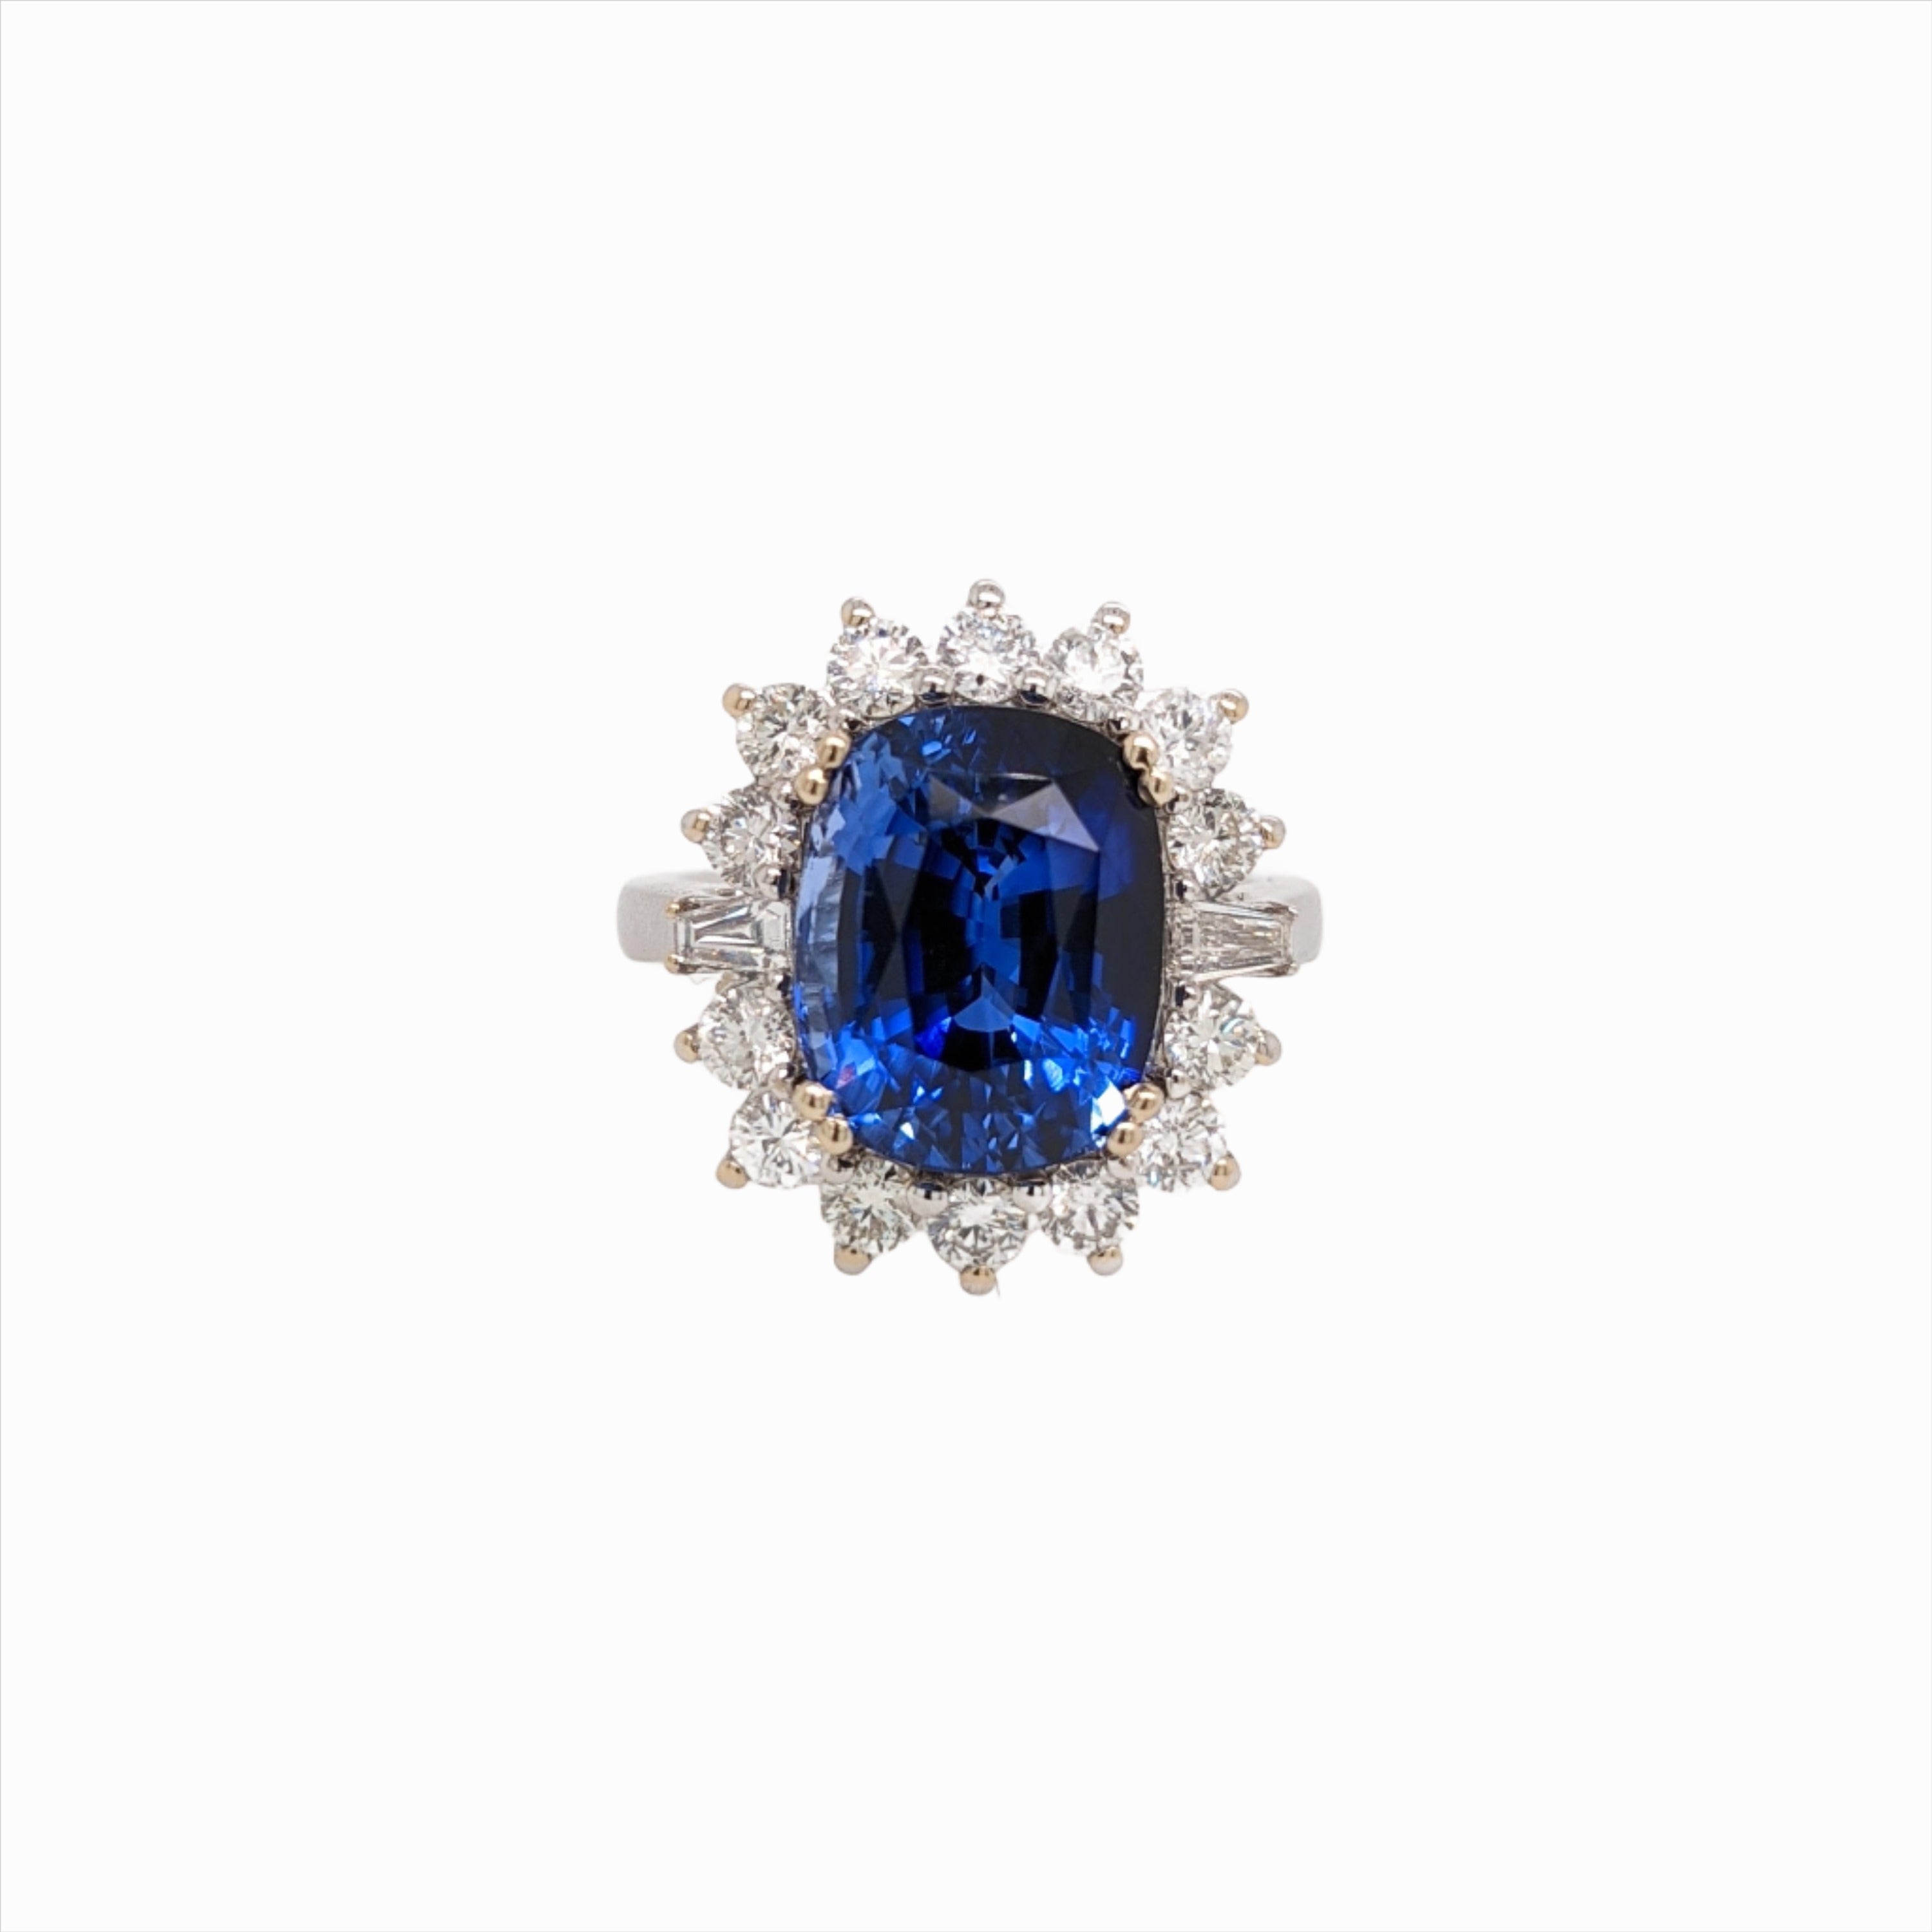 Stunning Ceylon Sapphire Ring w a Natural Diamond Halo in Solid 18k White Gold | Cushion 12x10mm | 9 carat Sapphire | Engagement Ring